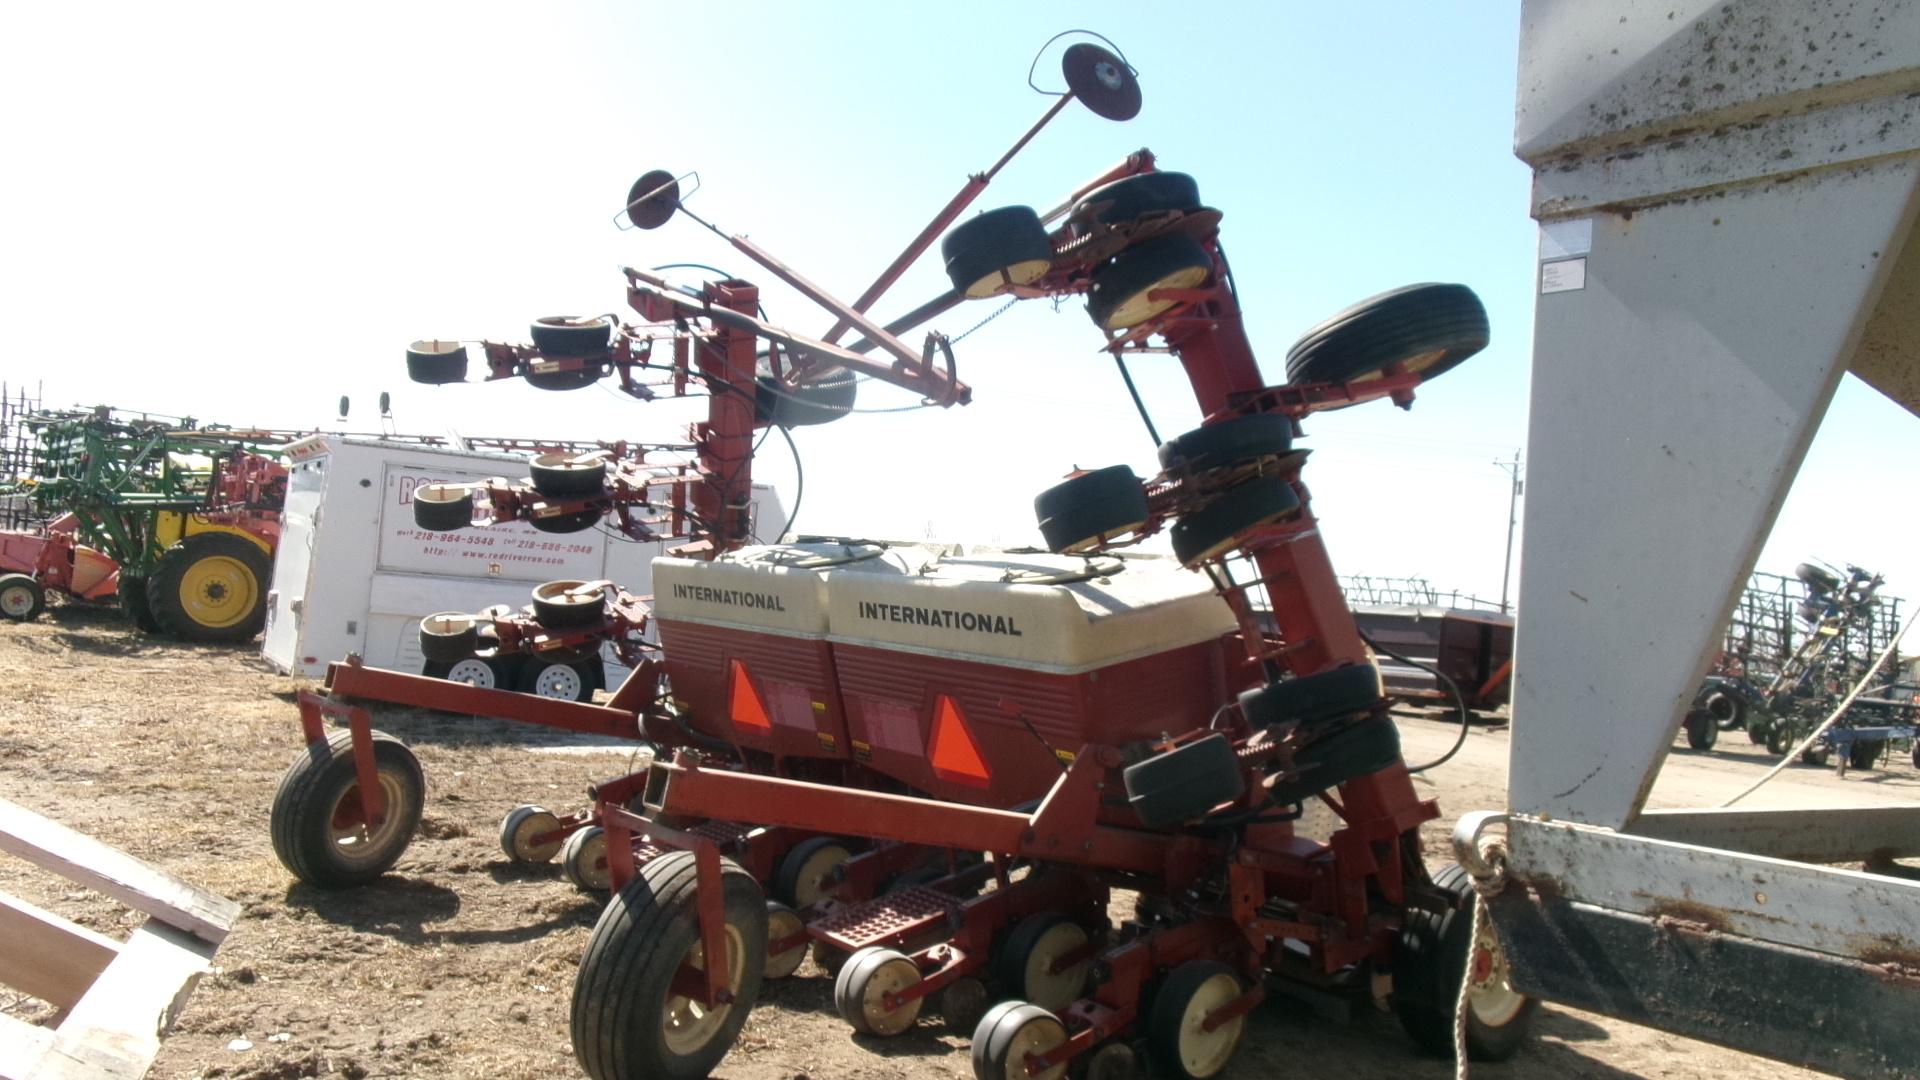 12-30" IHC 800 3 PT. CYCLO PLANTER, 1,000 PTO, markers, several drums,, monitor in office, +